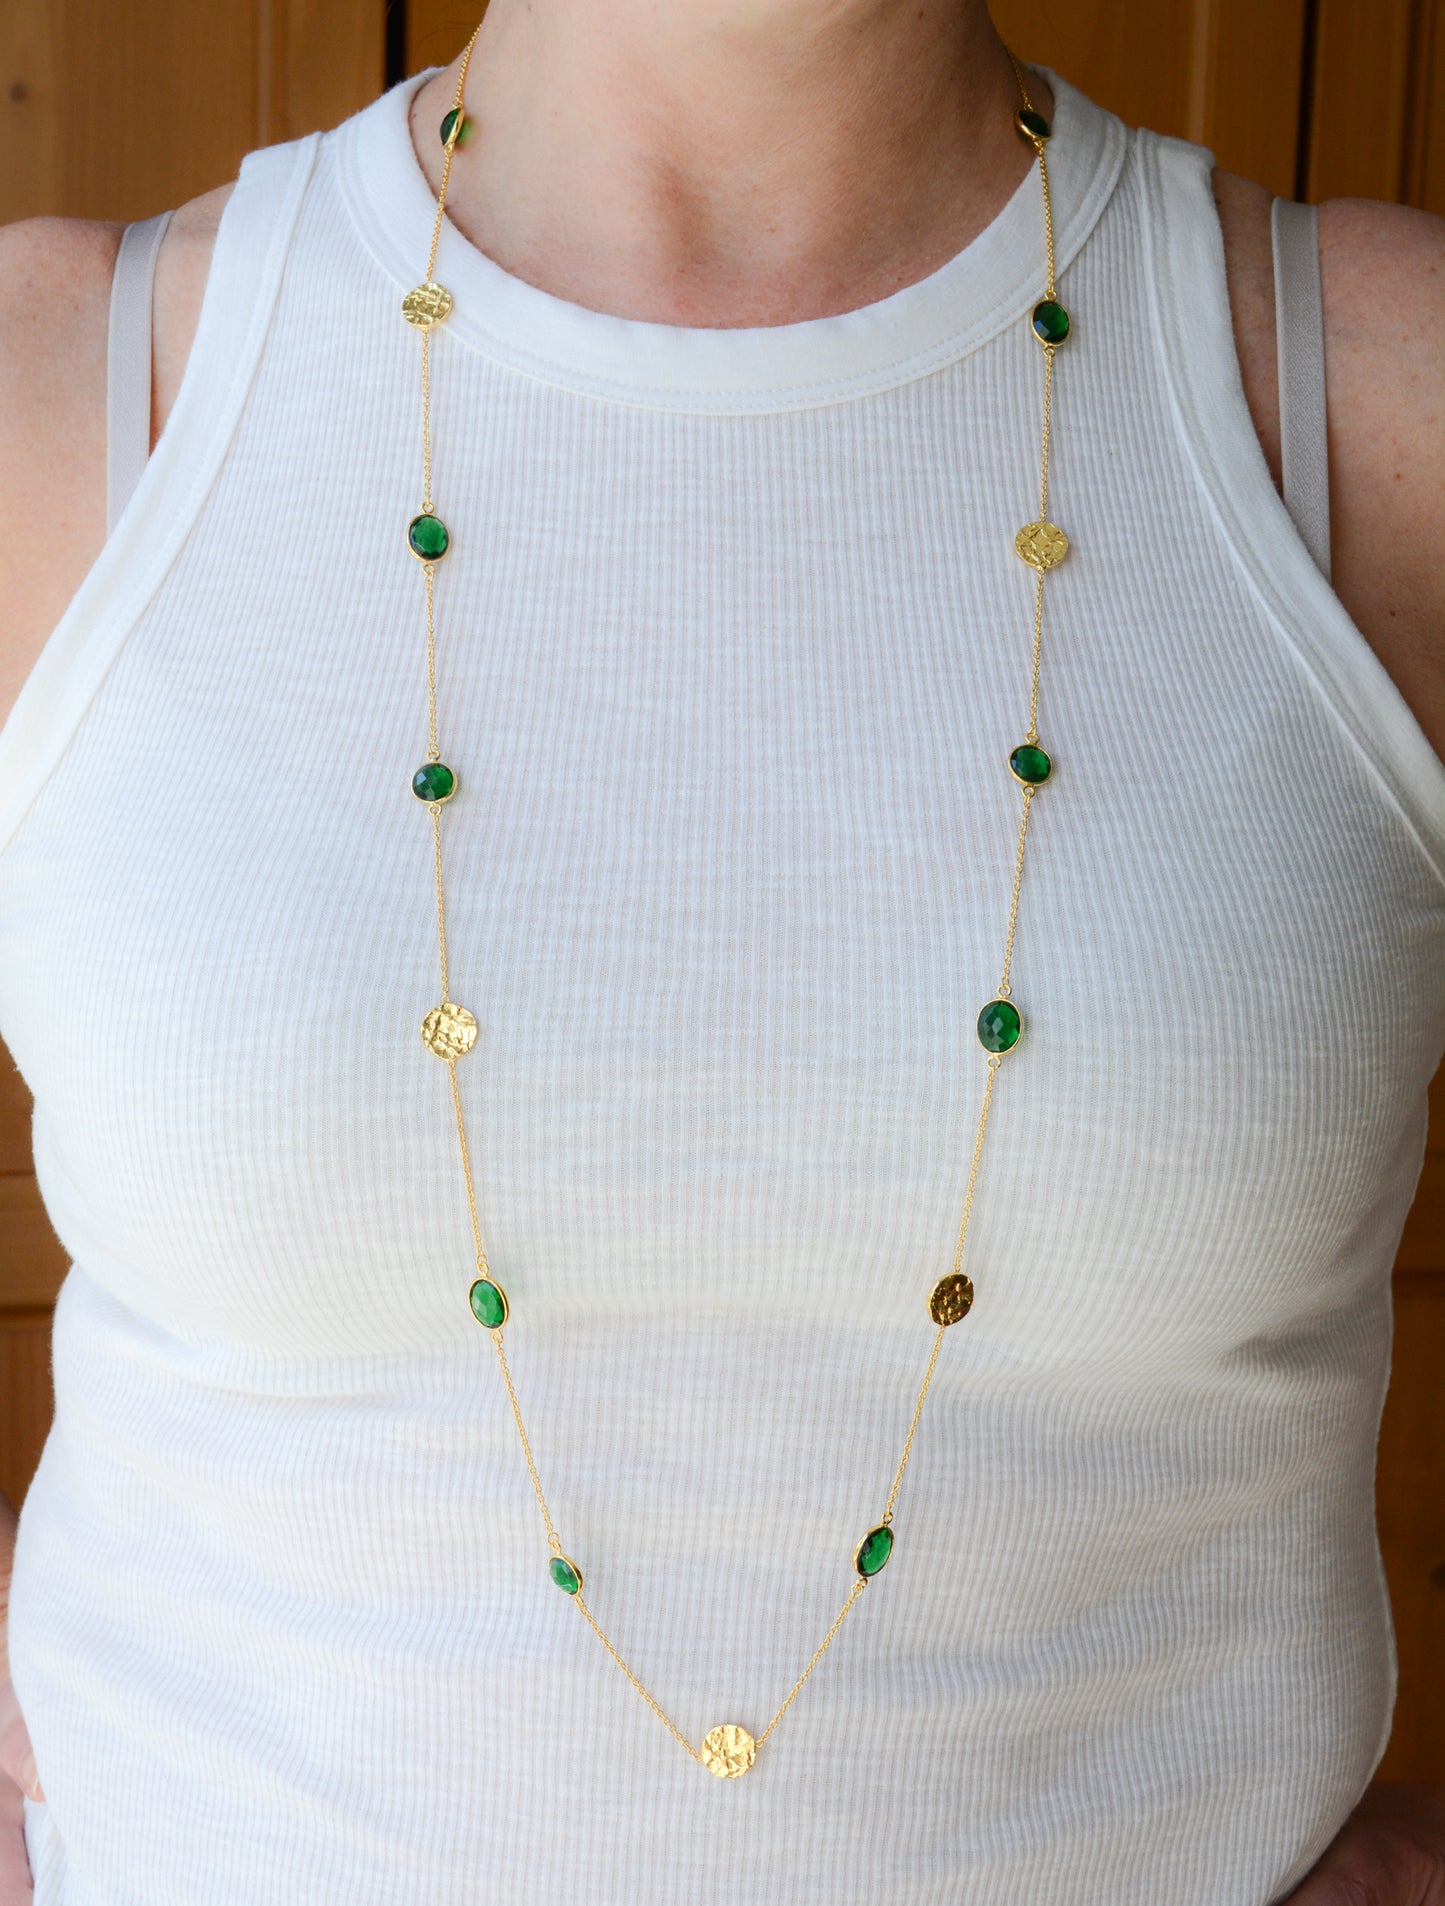 Green Tourmaline necklace with hammered disc accents